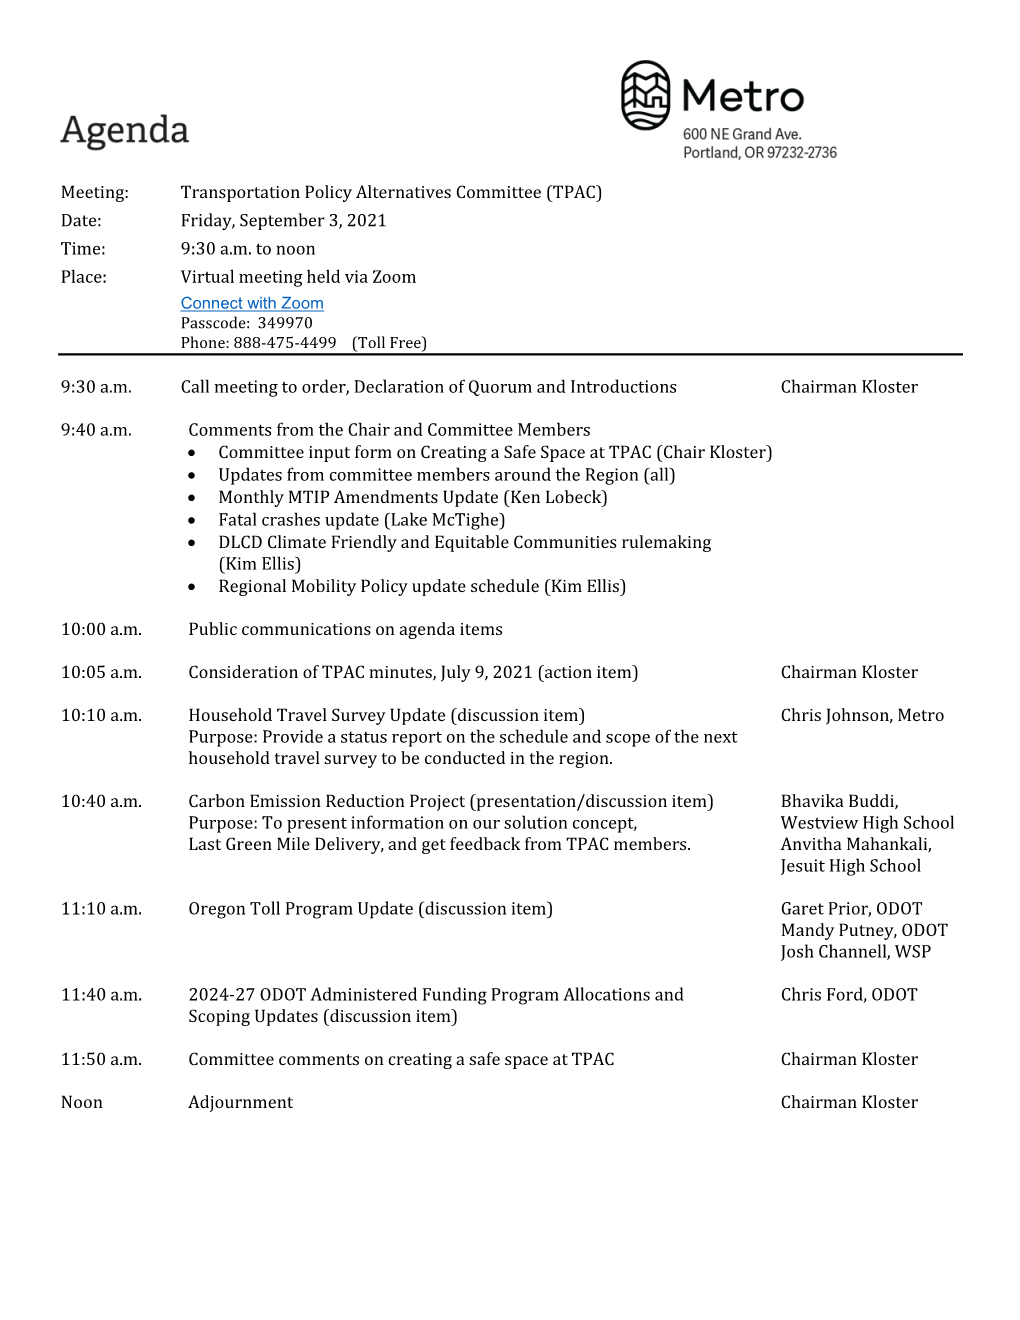 Meeting: Transportation Policy Alternatives Committee (TPAC) Date: Friday, September 3, 2021 Time: 9:30 A.M. to Noon Place: Virt